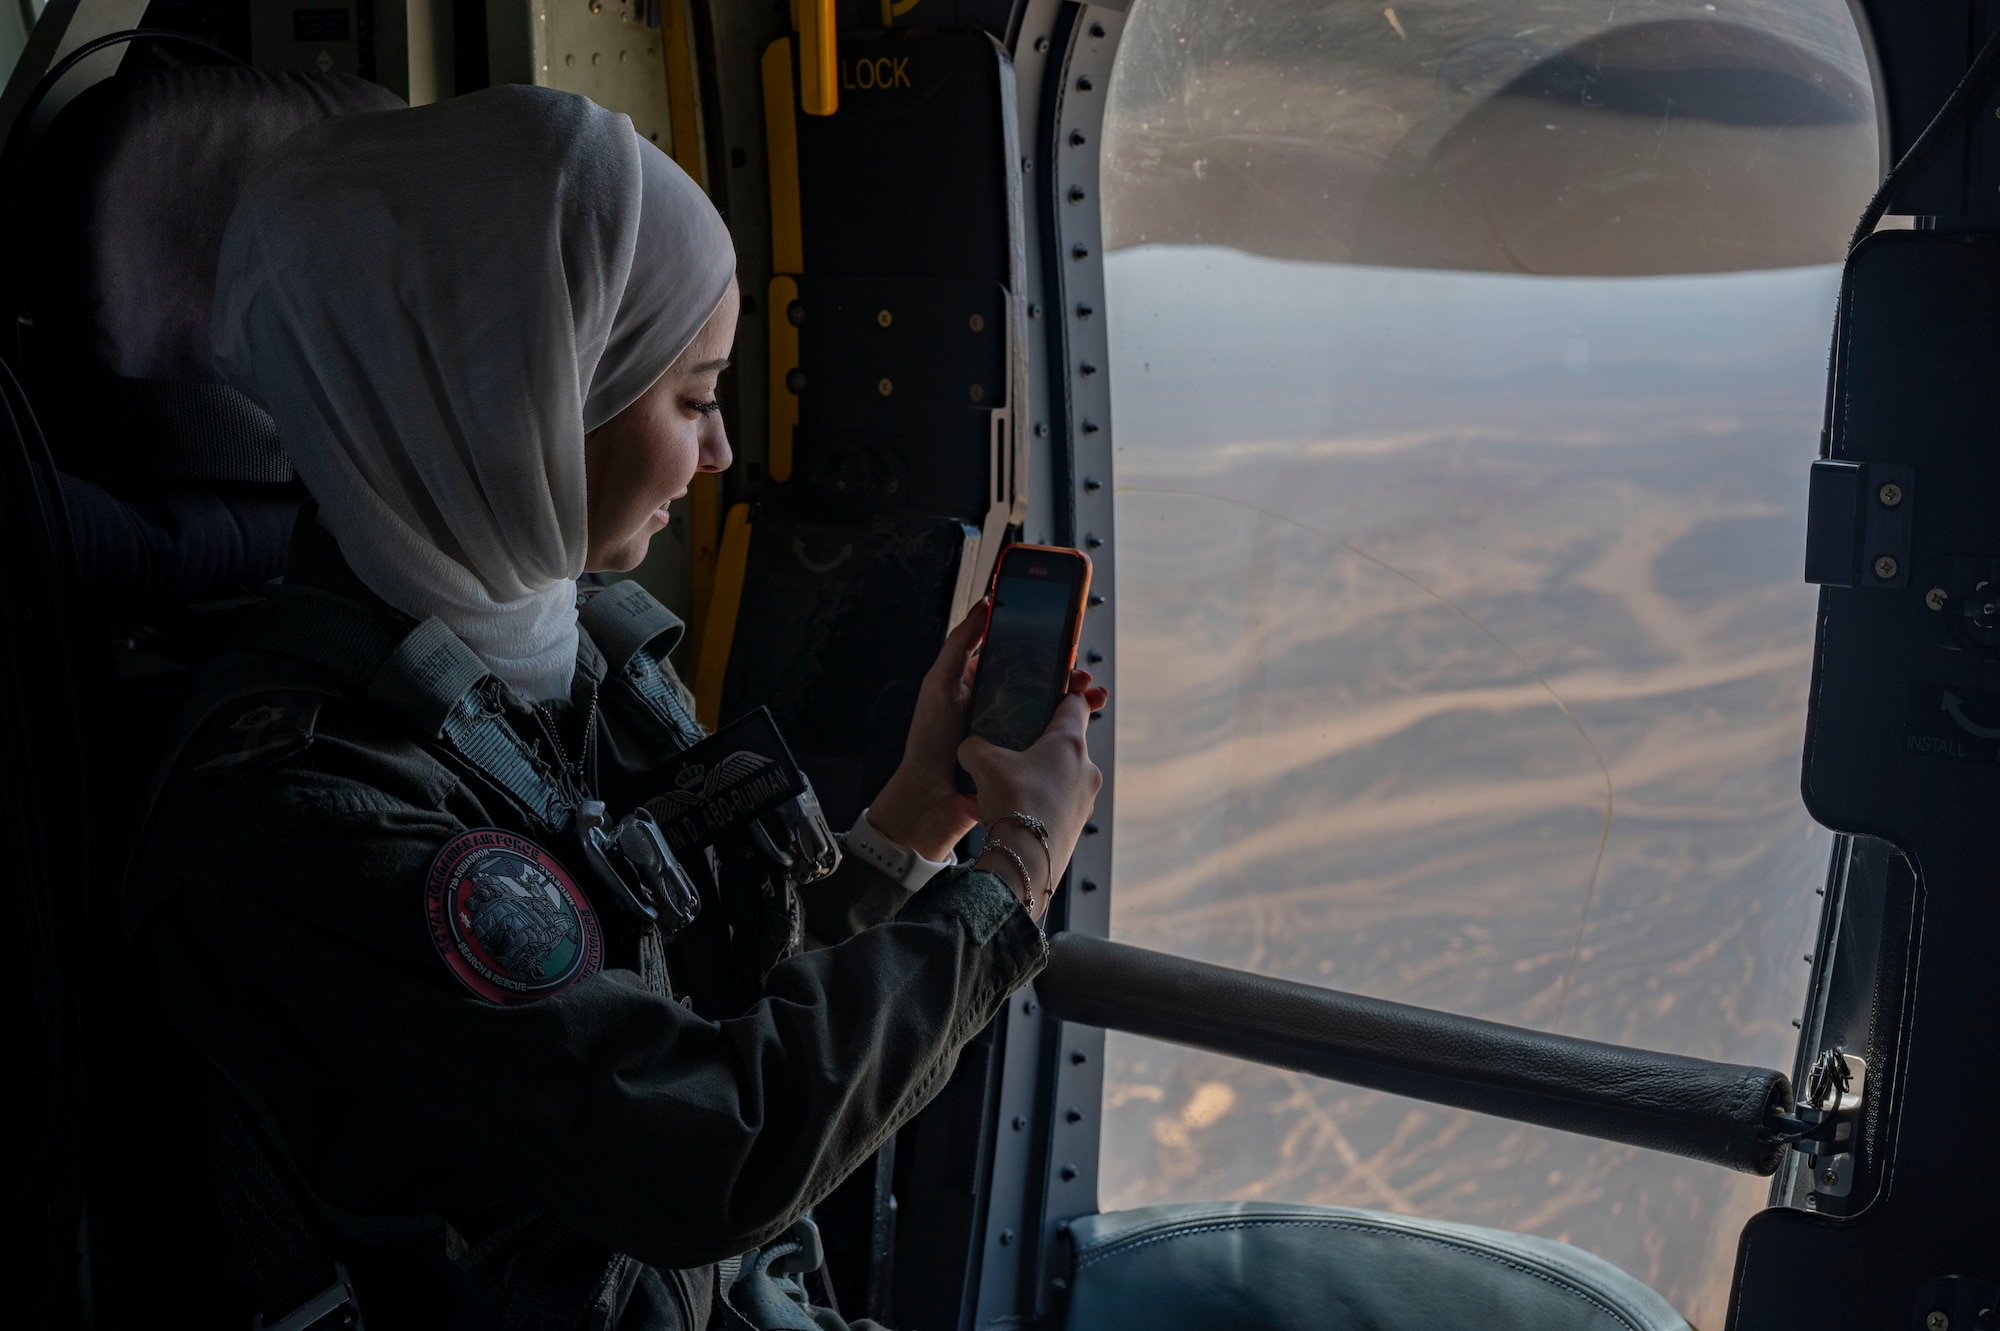 Lieutenant Lujain Abu-Rumman, Royal Jordanian Air Force Super Puma pilot, takes a photo from a window of a U.S. Air Force HC-130J Combat King II aircraft during a low-level mission over outlying areas of Wadi Rum, Jordan on May 16, 2022. The engagement is part of an ongoing partnership between the two countries focused on empowering women in aviation as a way to cultivate and strengthen relationships. (U.S. Air Force photo by Master Sgt. Kelly Goonan)